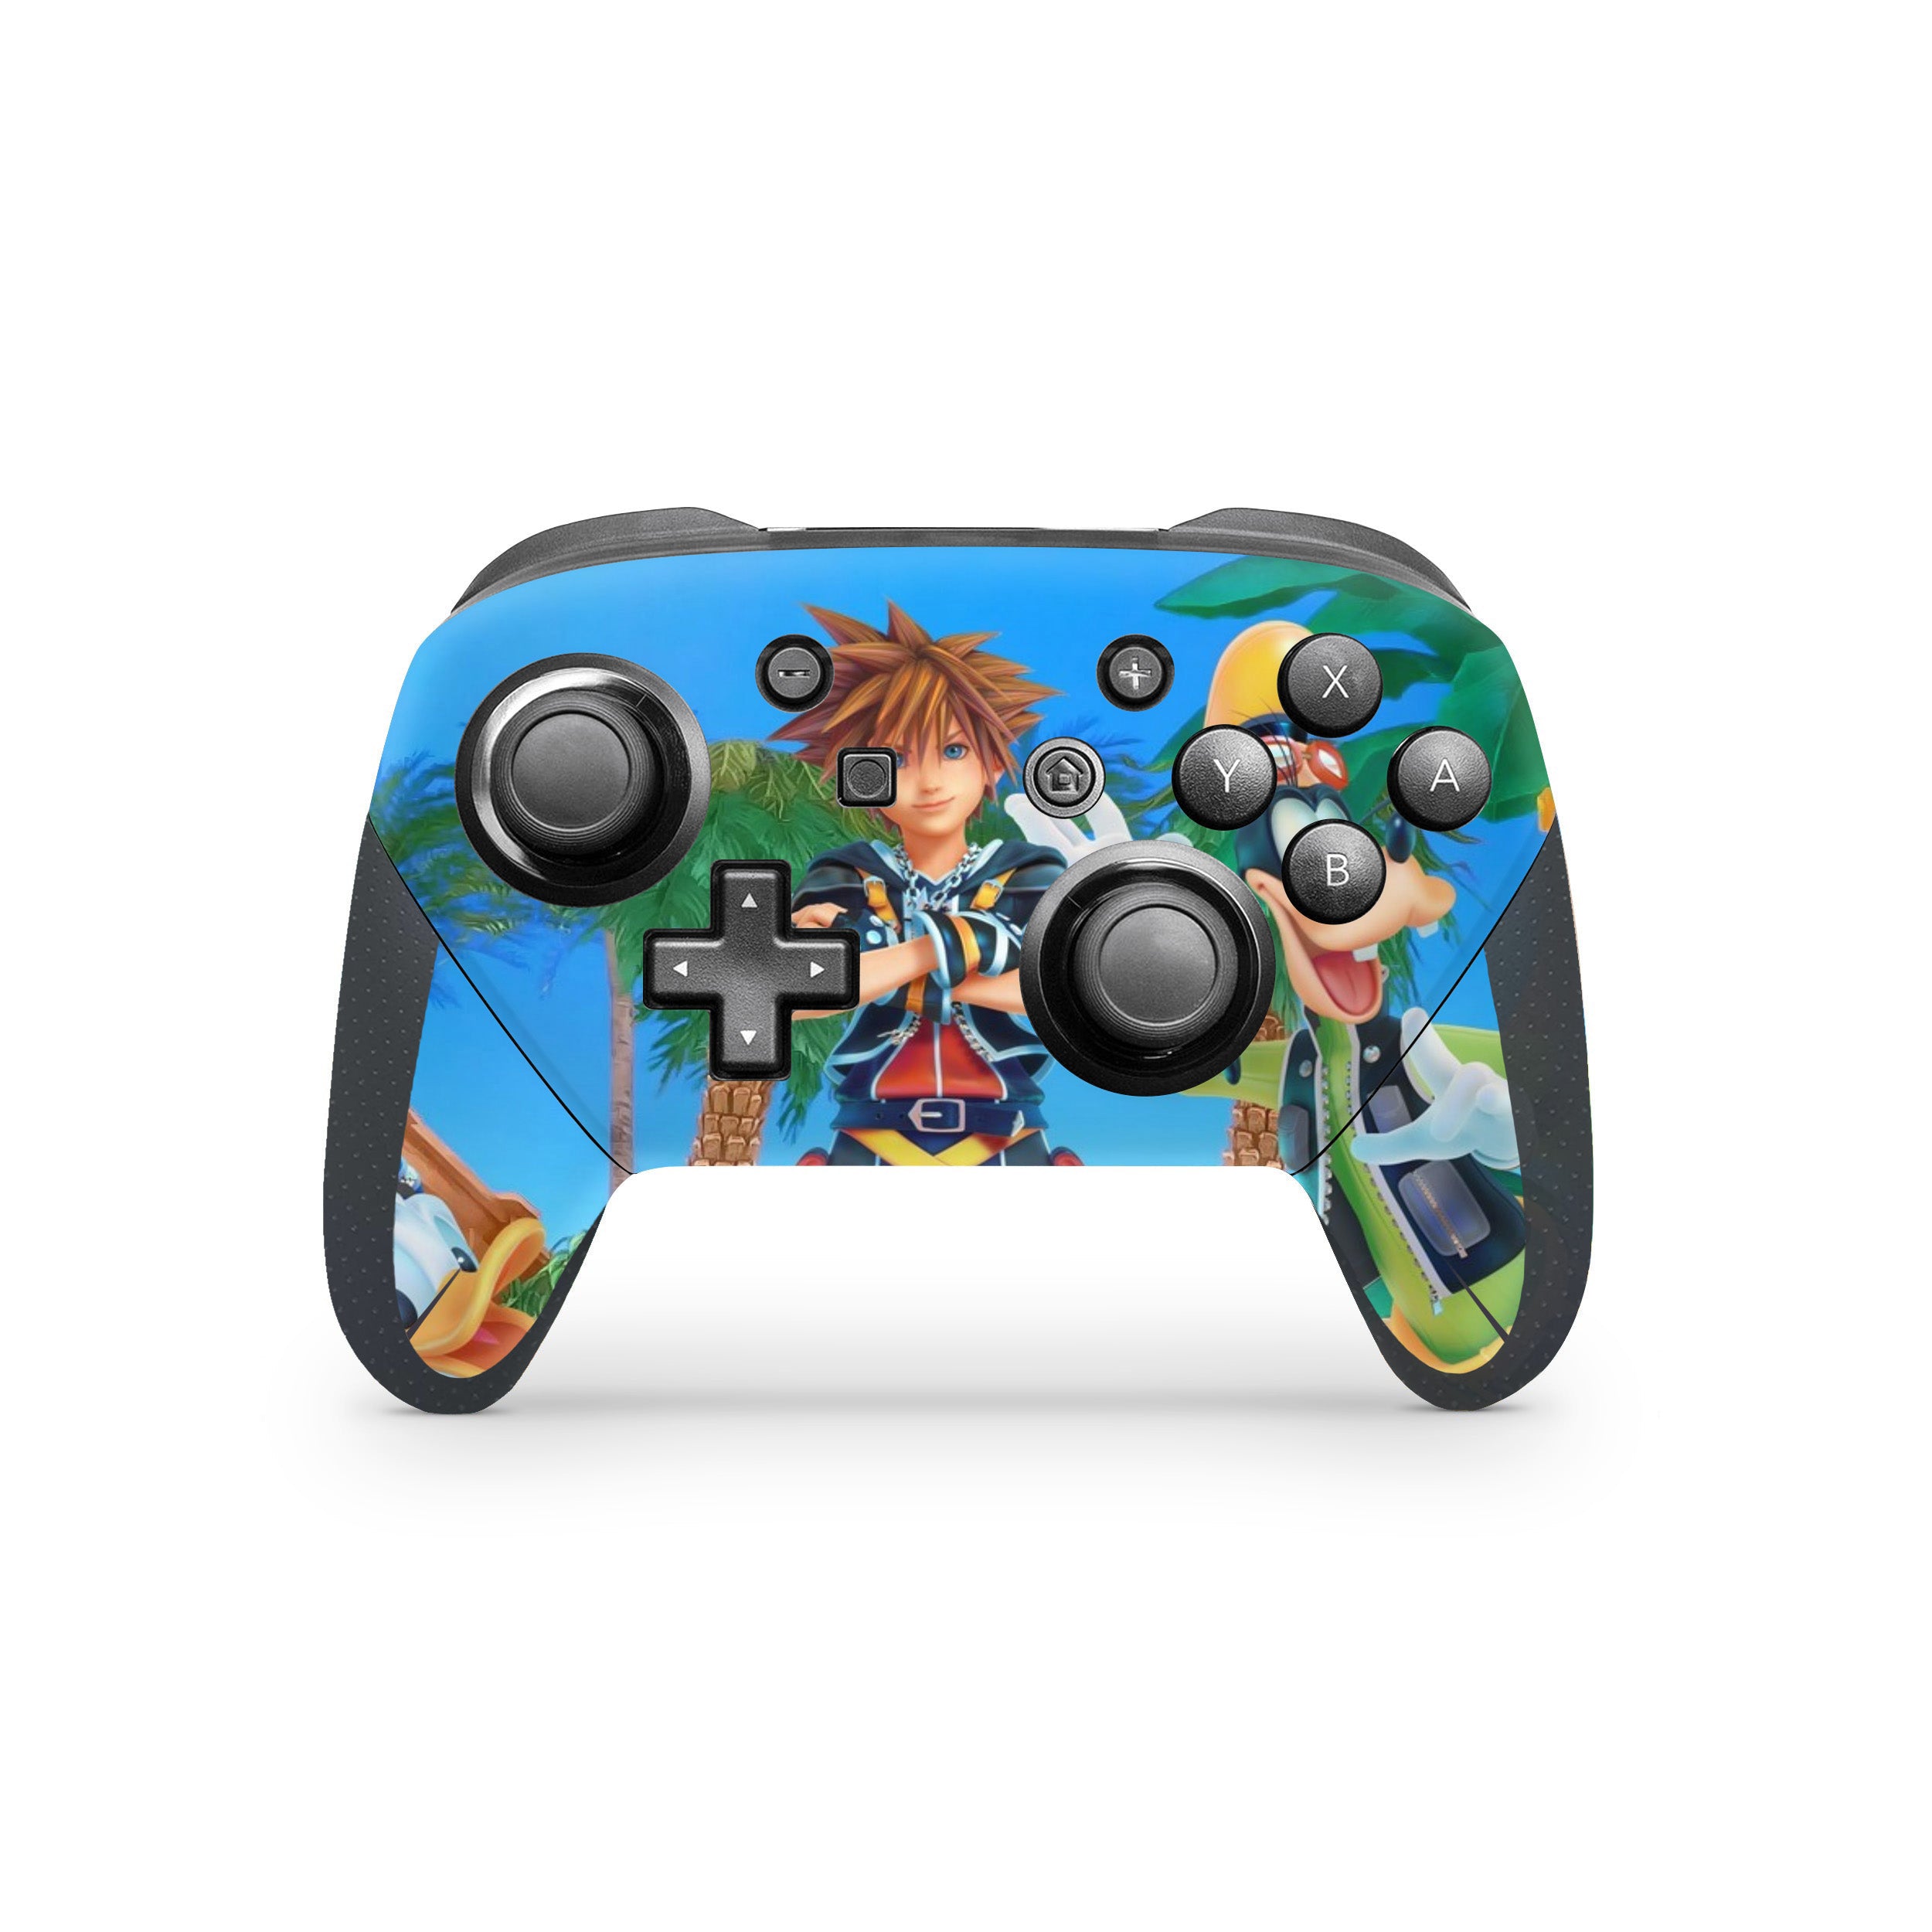 A video game skin featuring a Kingdom Hearts design for the Switch Pro Controller.